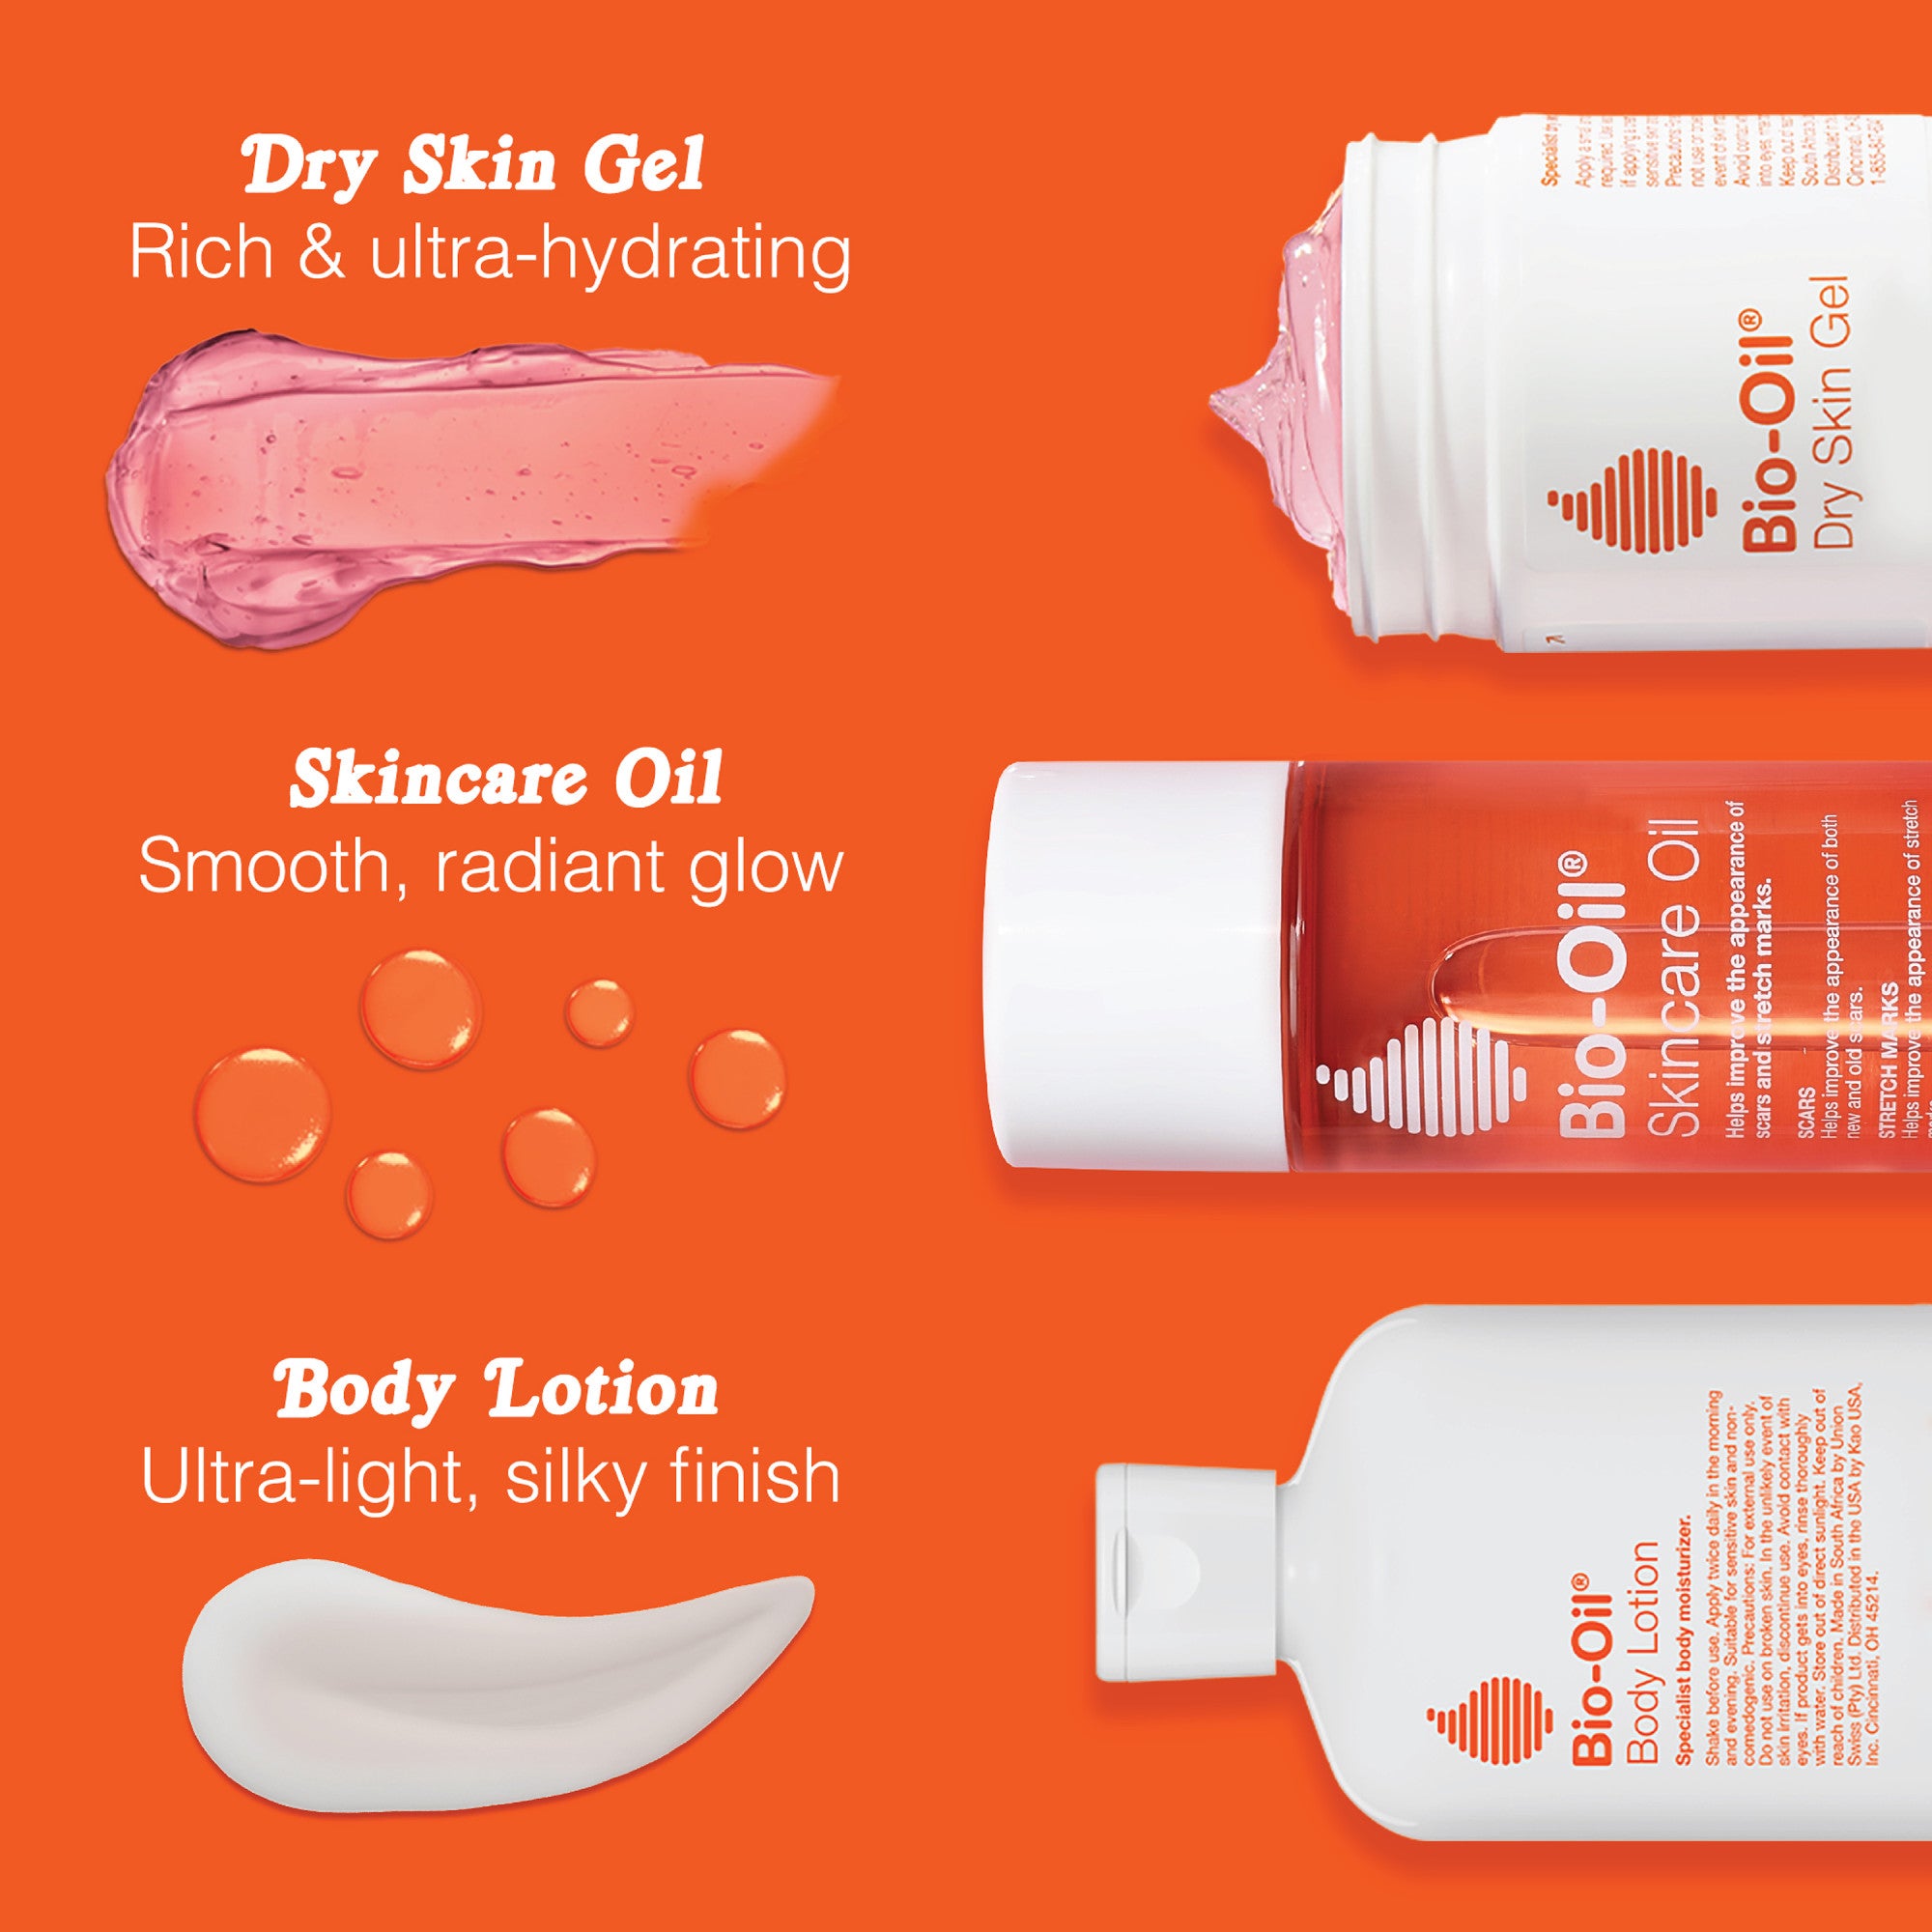 Dry Skin Gel: Rich and ultra hydrating. Skincare oil: Smooth, radiant glow. Body Lotion: Ultra-light, silky finish.